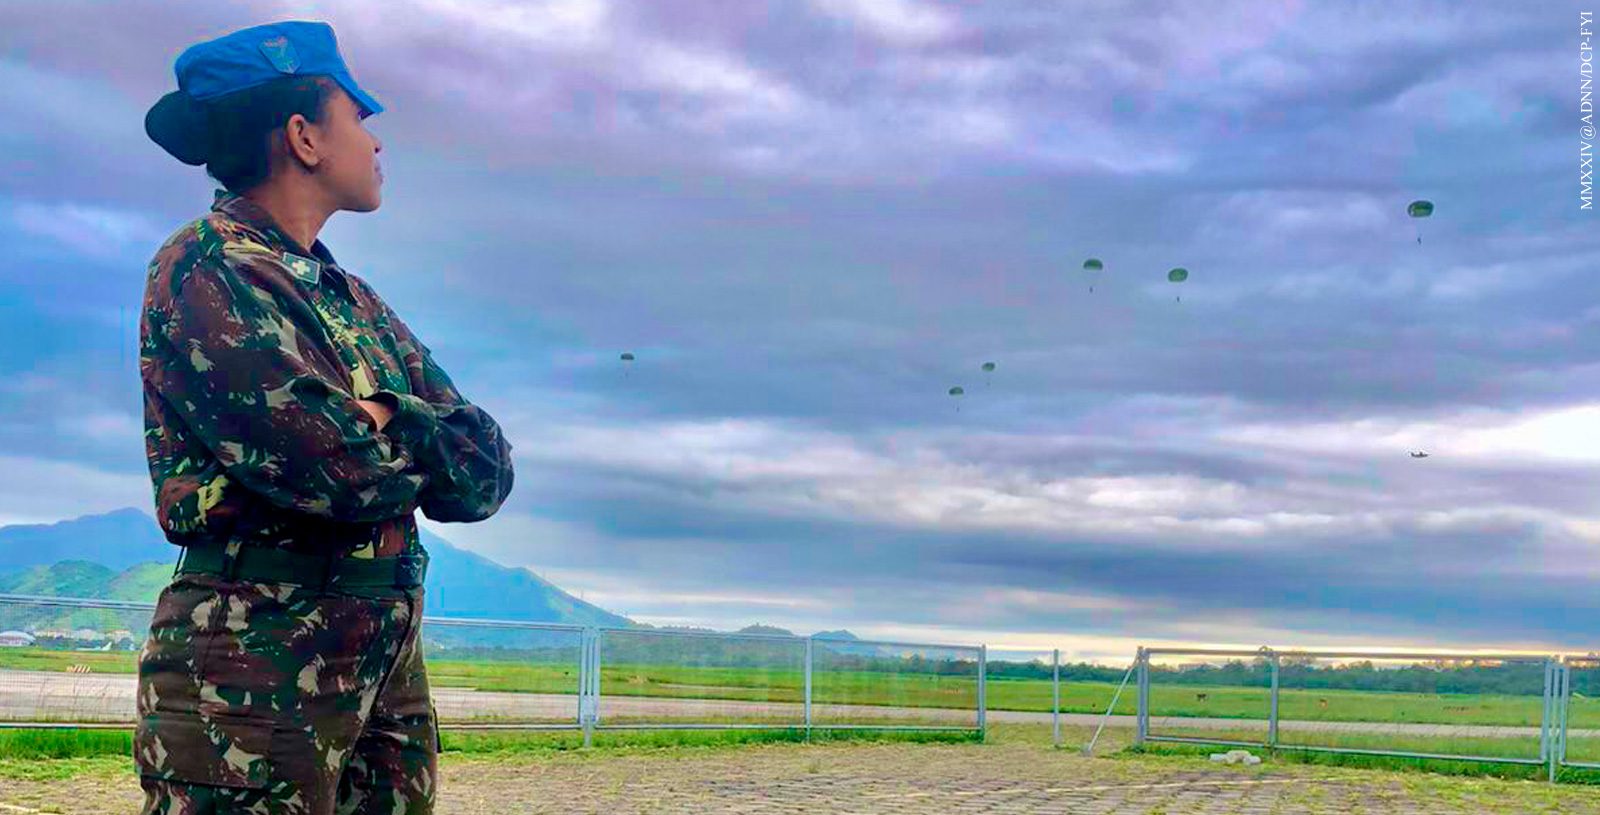 The story of the Brazilian Army's first female paratrooper instructor